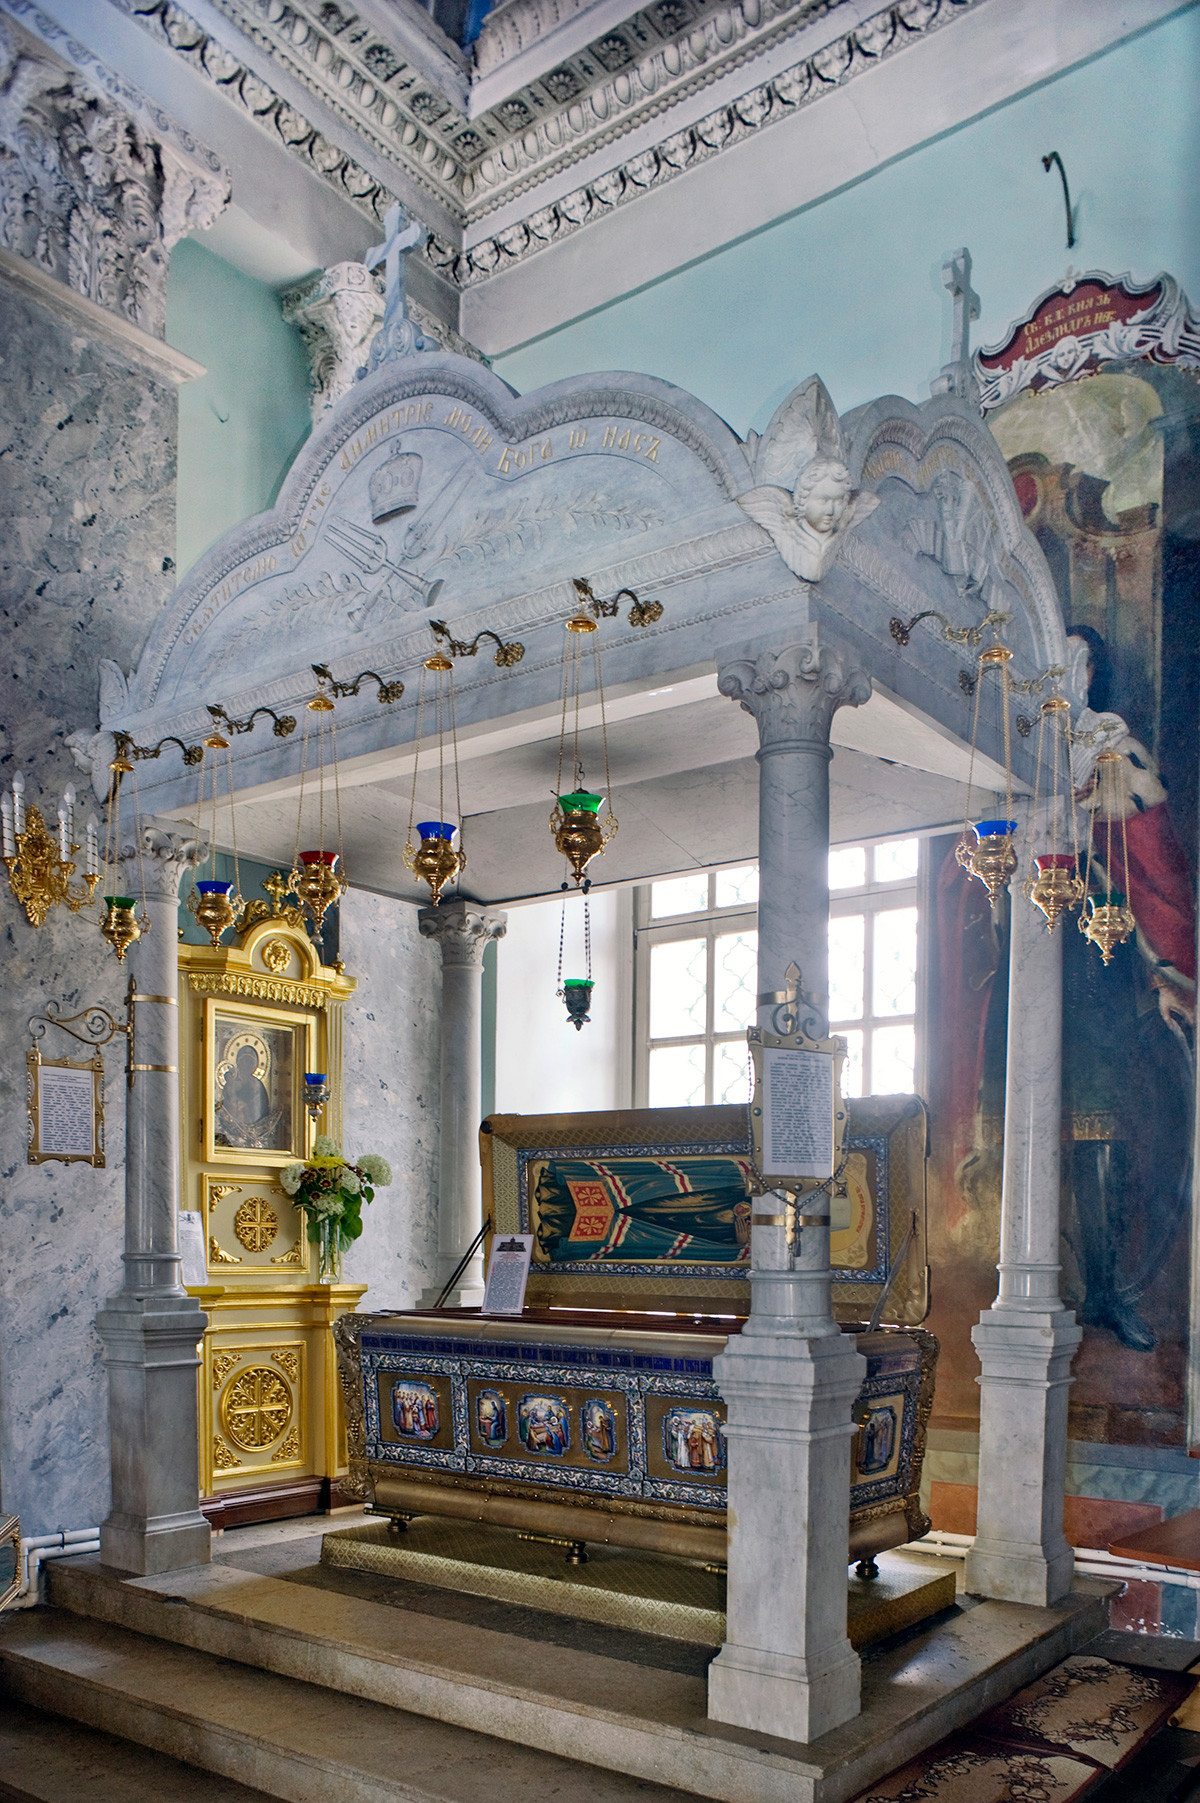 St. Dimitry Cathedral interior. Baldachin with silver sarcophagus  (third) containing relics of St. Dimitry of Rostov. July 7, 2019 